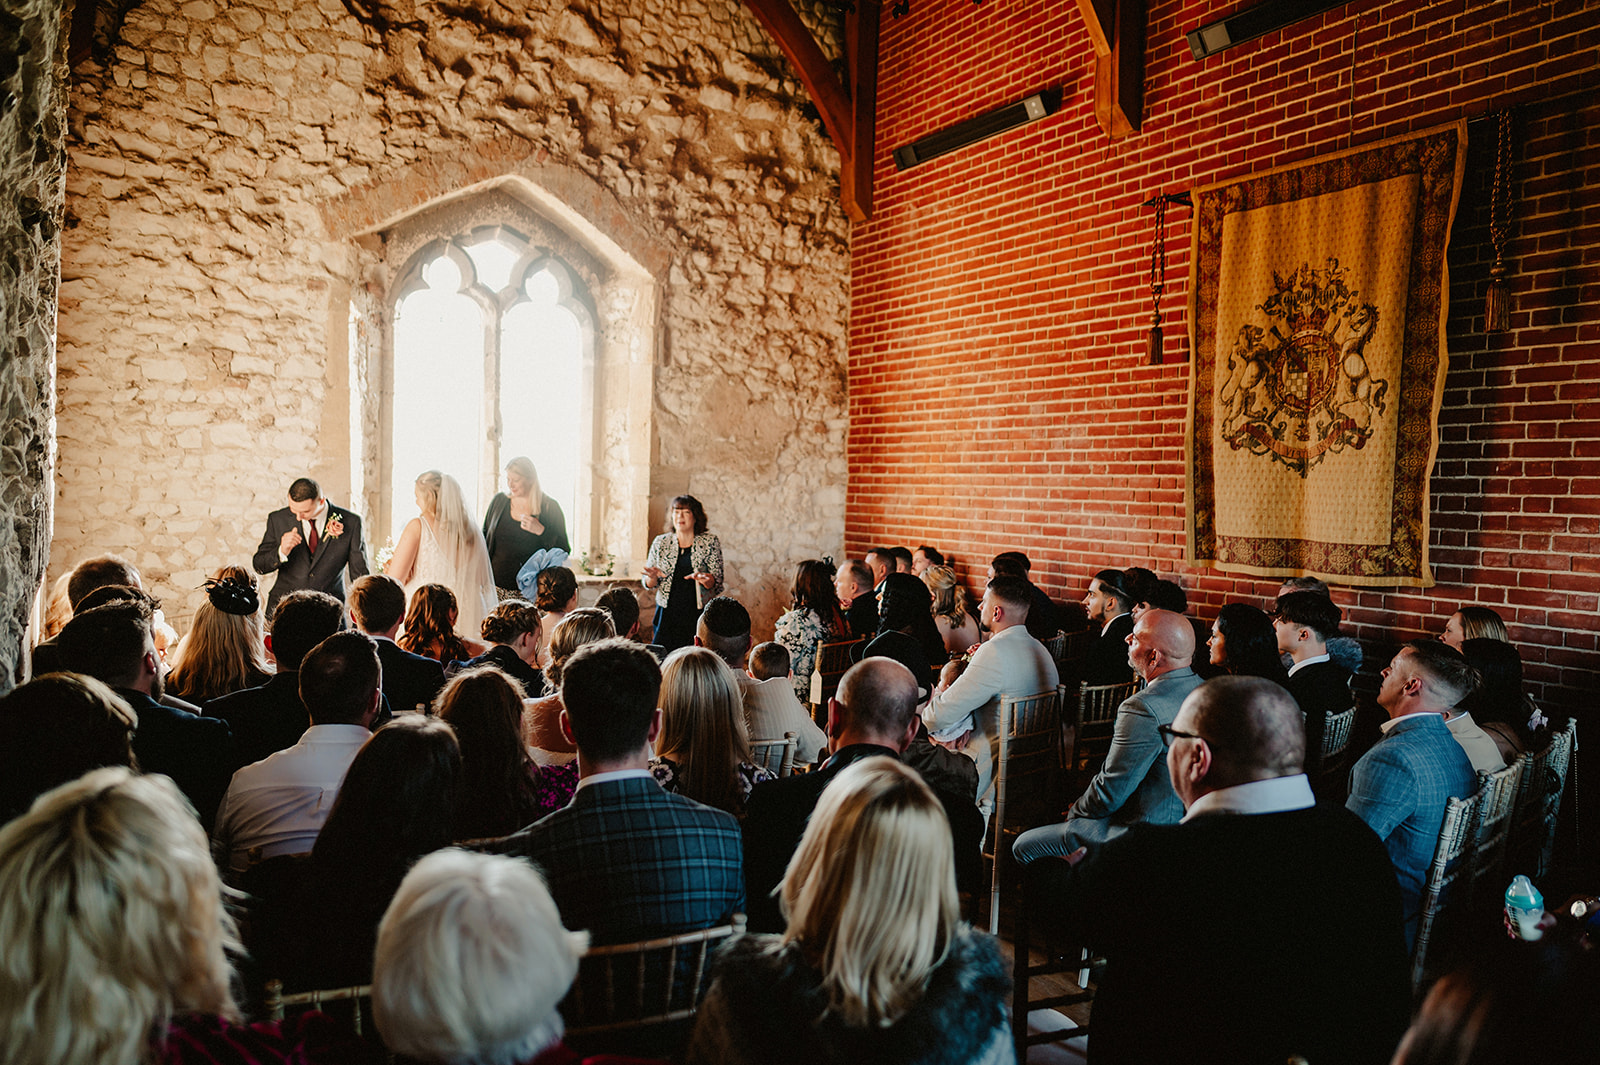 the wedding ceremony room in the tower at pentney abbey